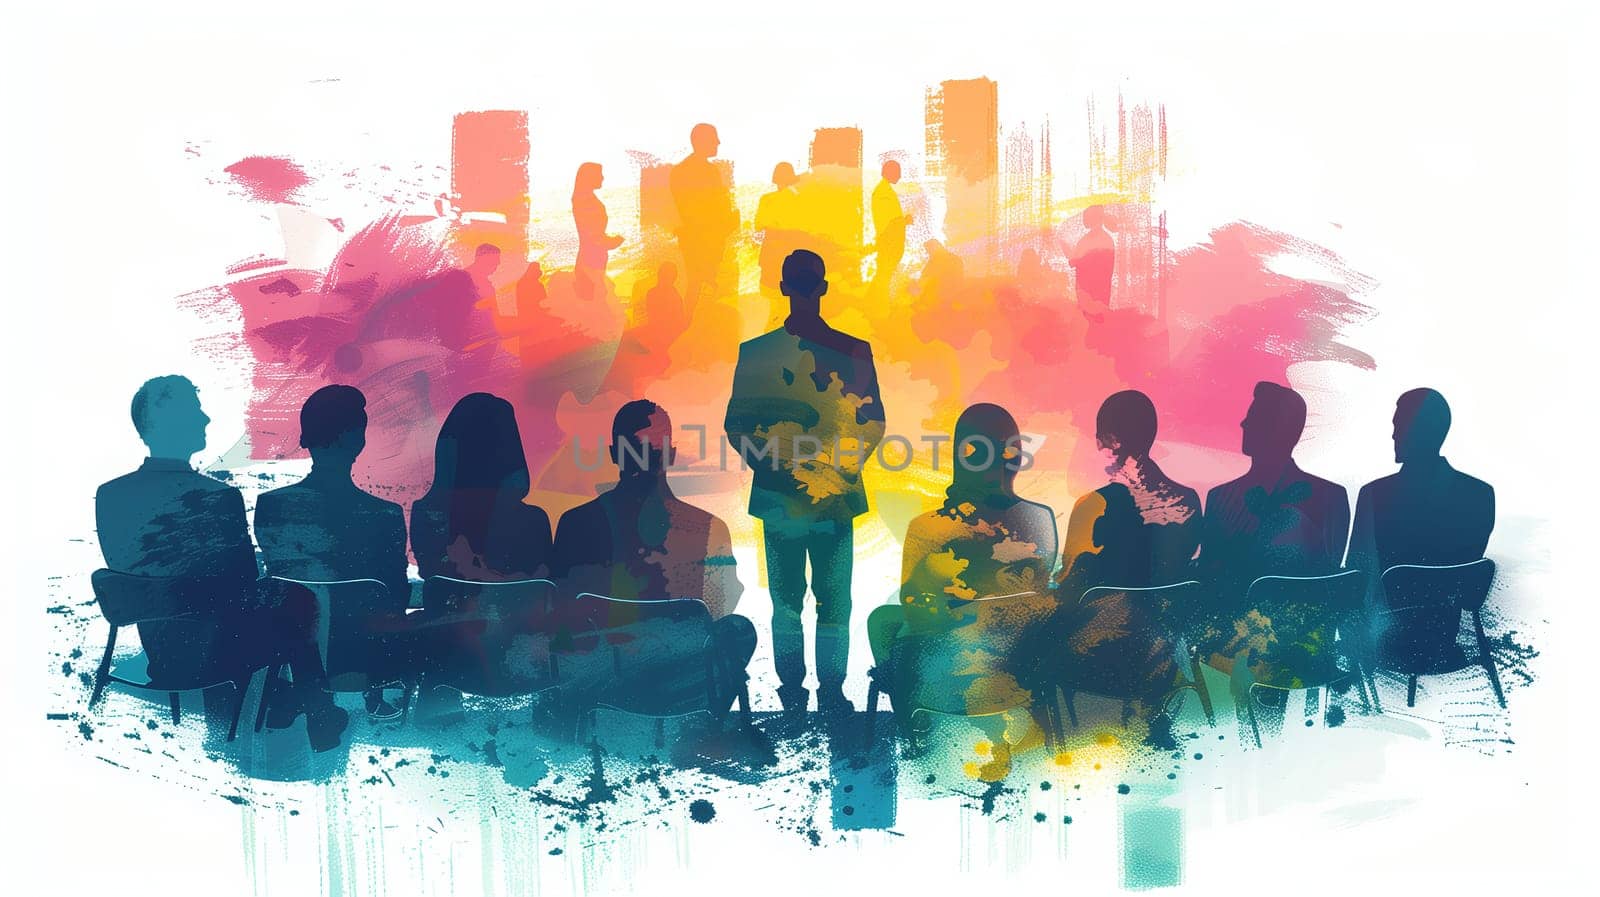 A group of silhouetted individuals is seated with one standing person in the center, set against a vibrant backdrop splashed with rainbow colors symbolizing LGBT pride. The outline of a metropolitan skyline merges into the vivid display, reflecting a sense of community and diversity.